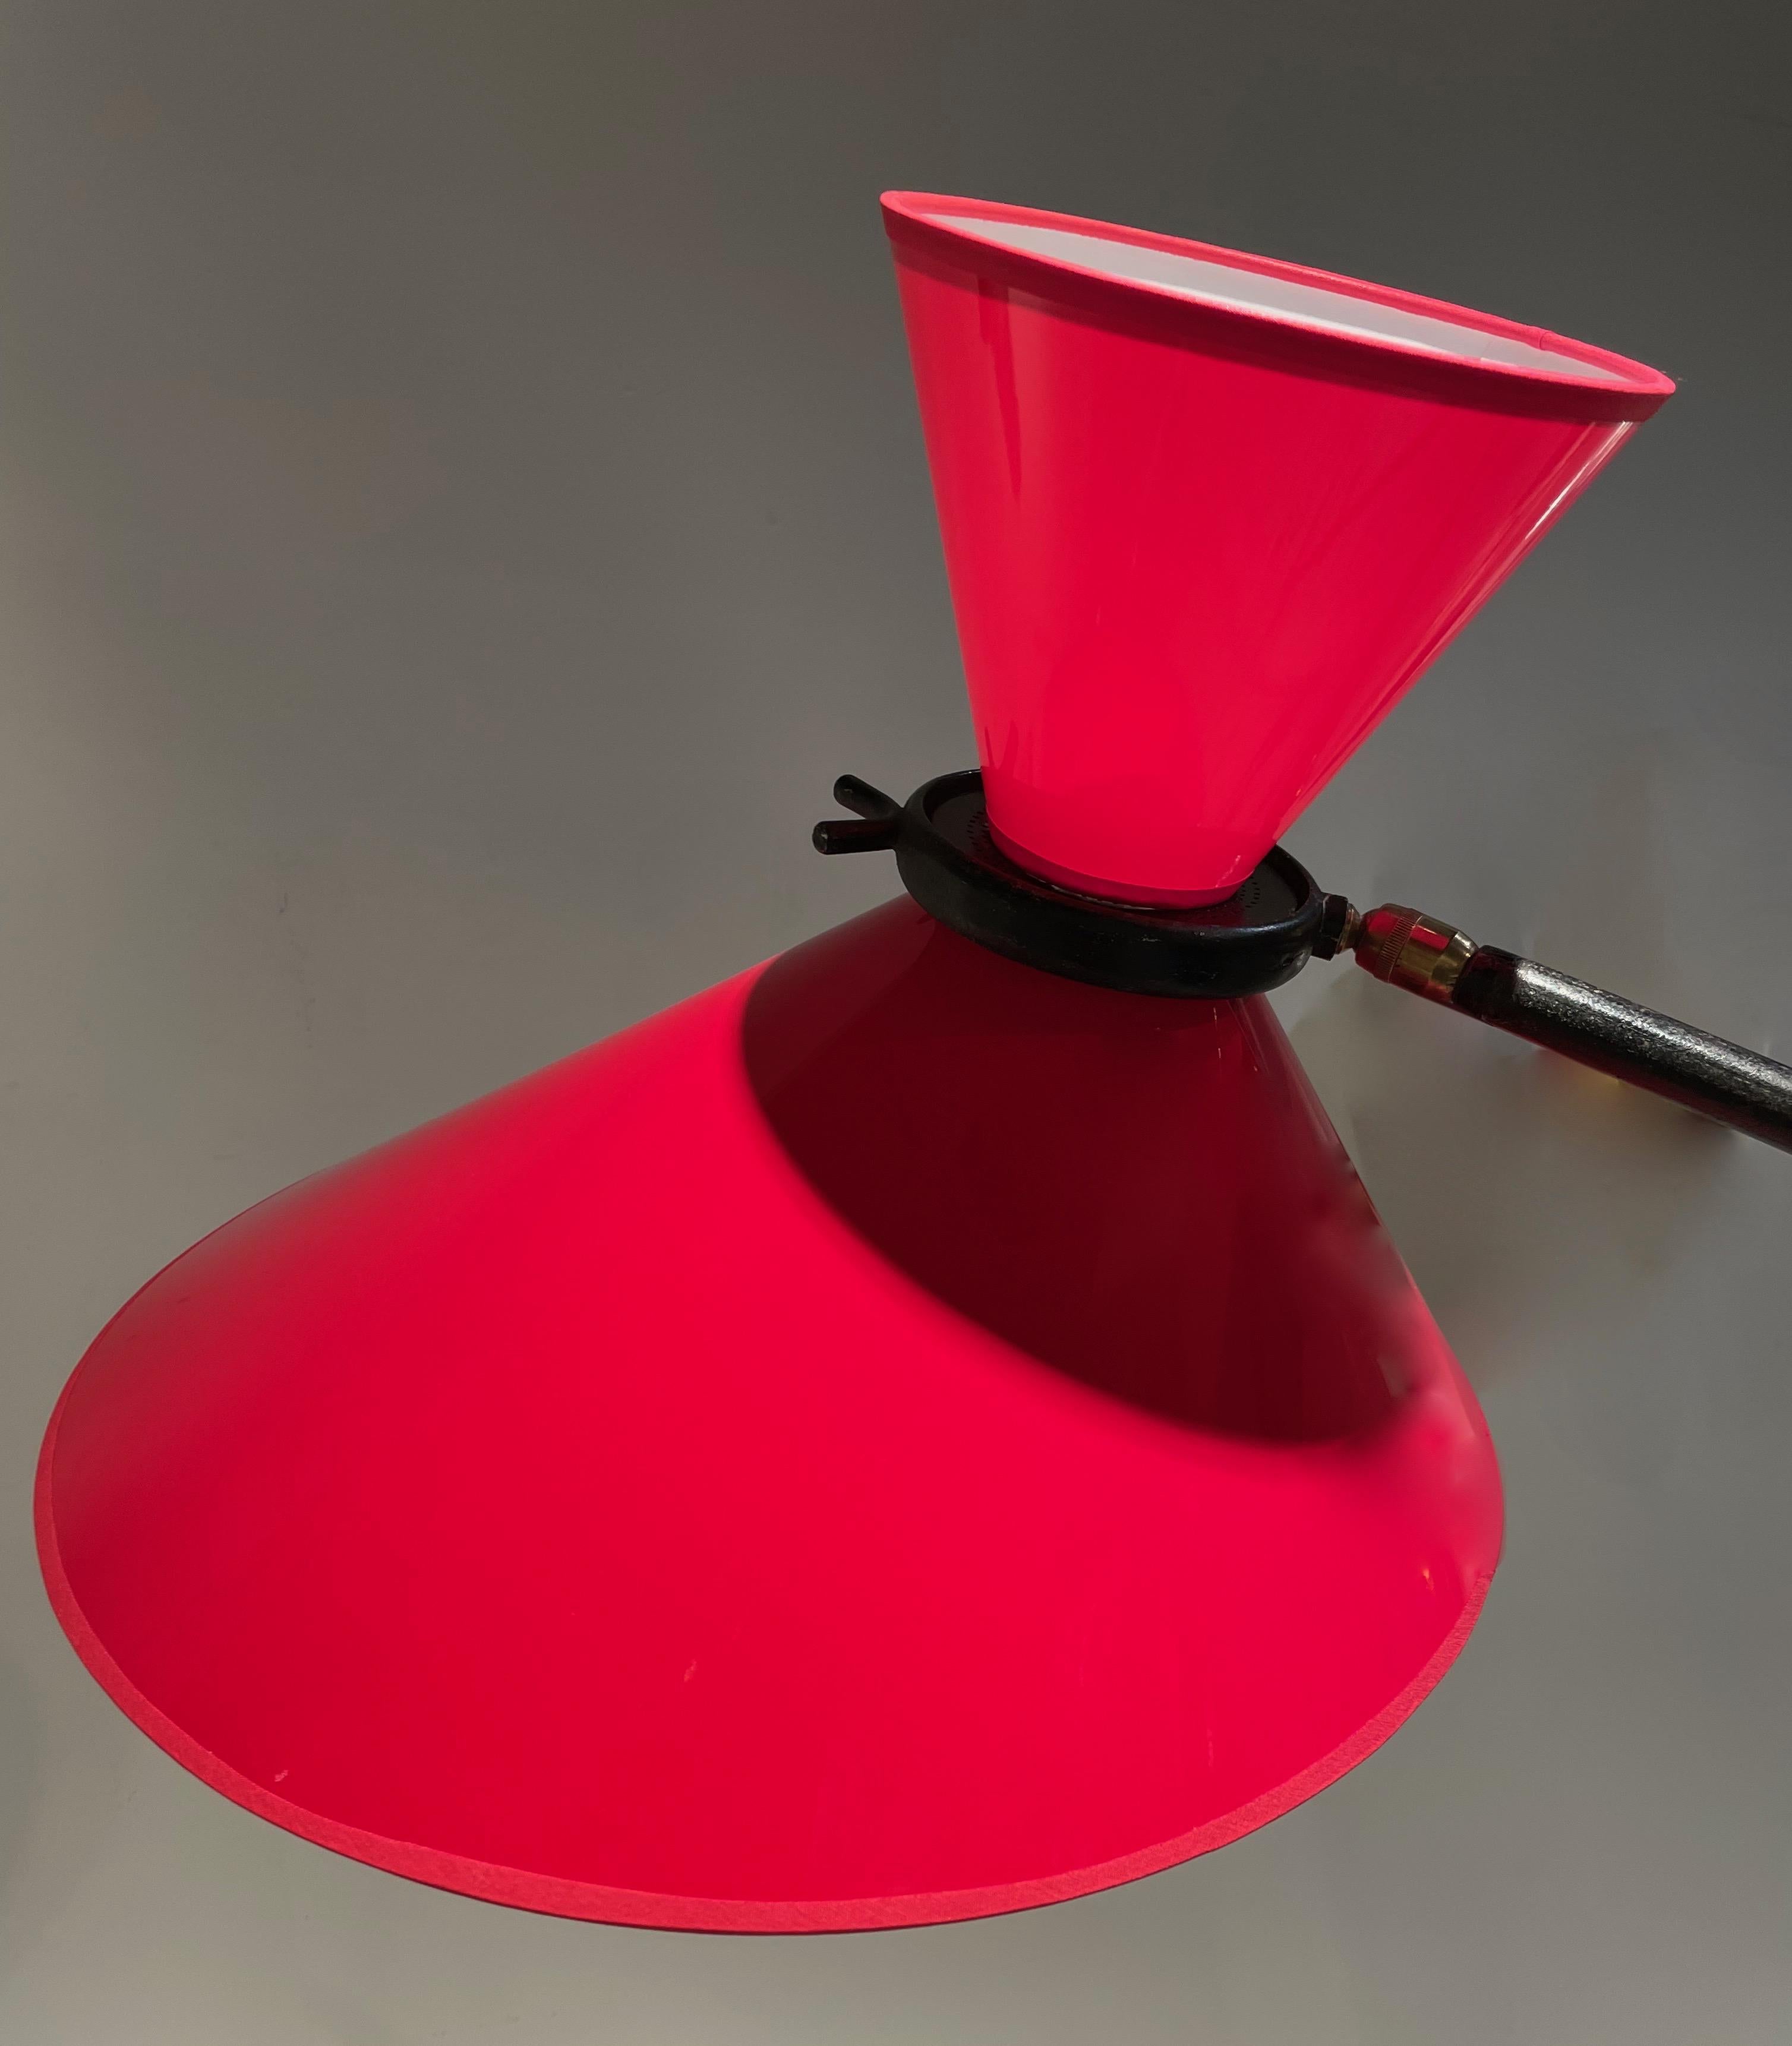 Mid-20th Century 50's Adjustable Floor Lamp With Red Diabolo Shade by Maison Lunel, France 1954. For Sale